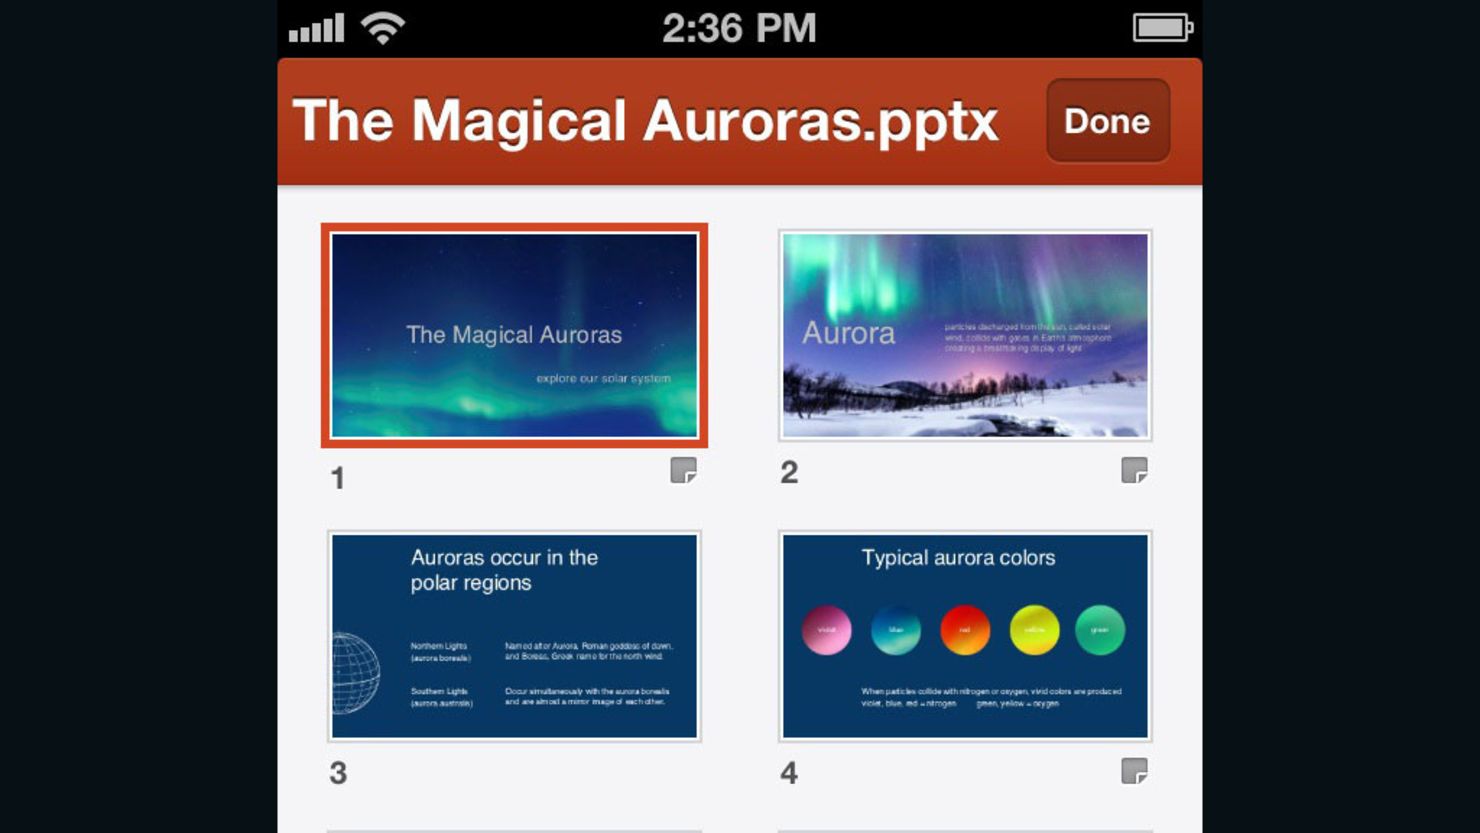 PowerPoint is one of the Office 365 tools iPhone users will now be able to use on the go, Microsoft announced Friday.